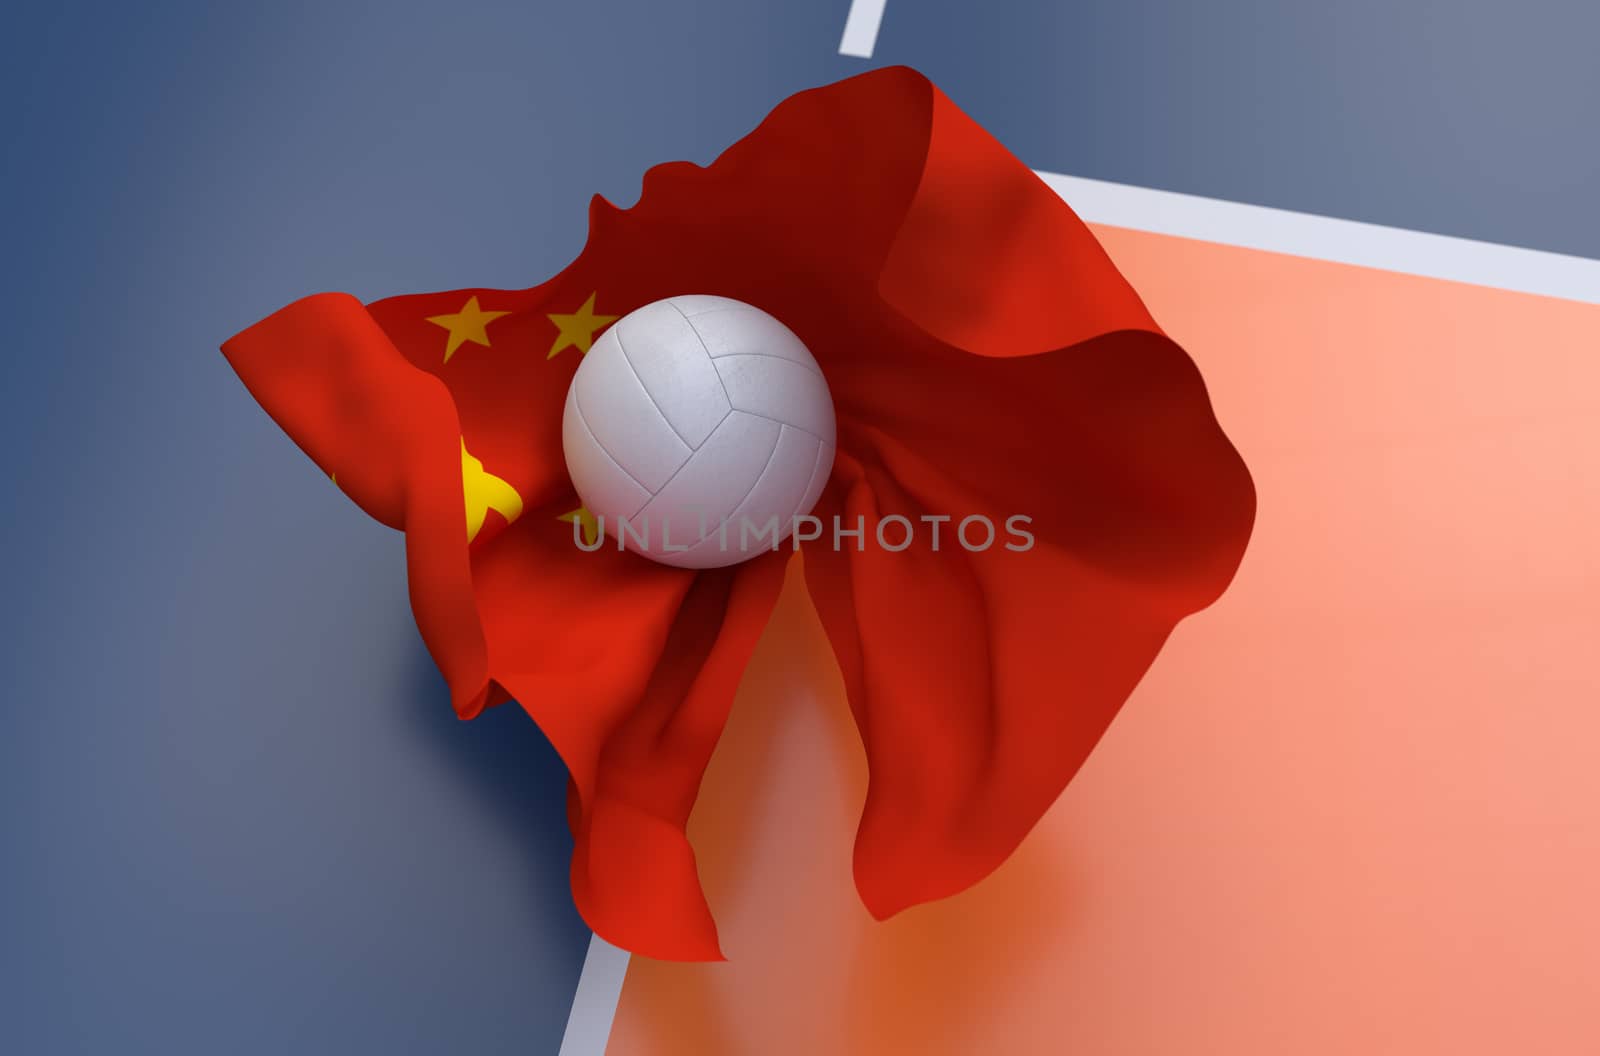 Flag of China with championship volleyball ball by Barbraford